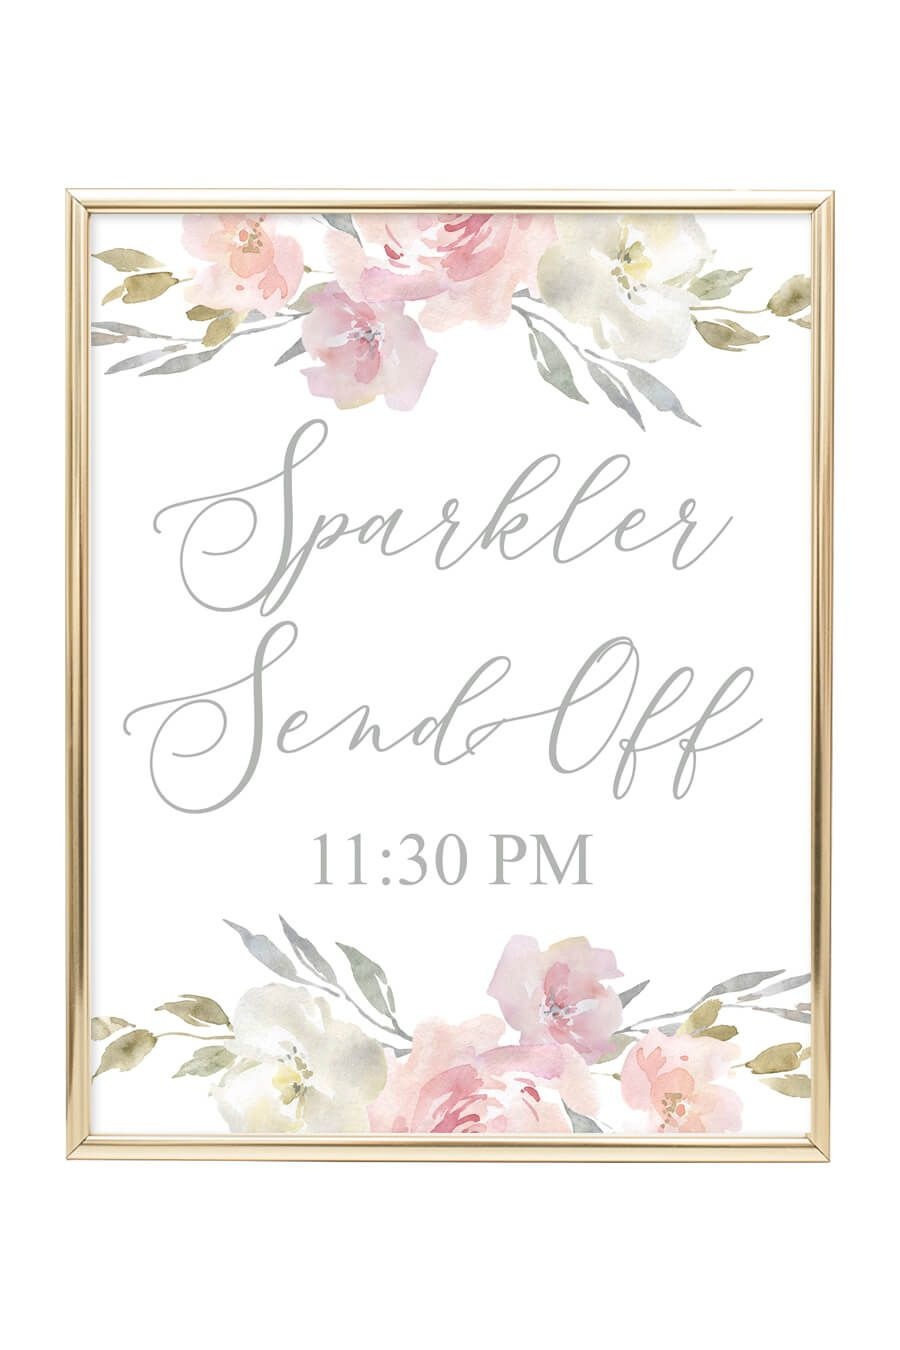 Weddings - Download Free Wedding Printables And Wedding Templates - Free Printable Wedding Sparkler Sign